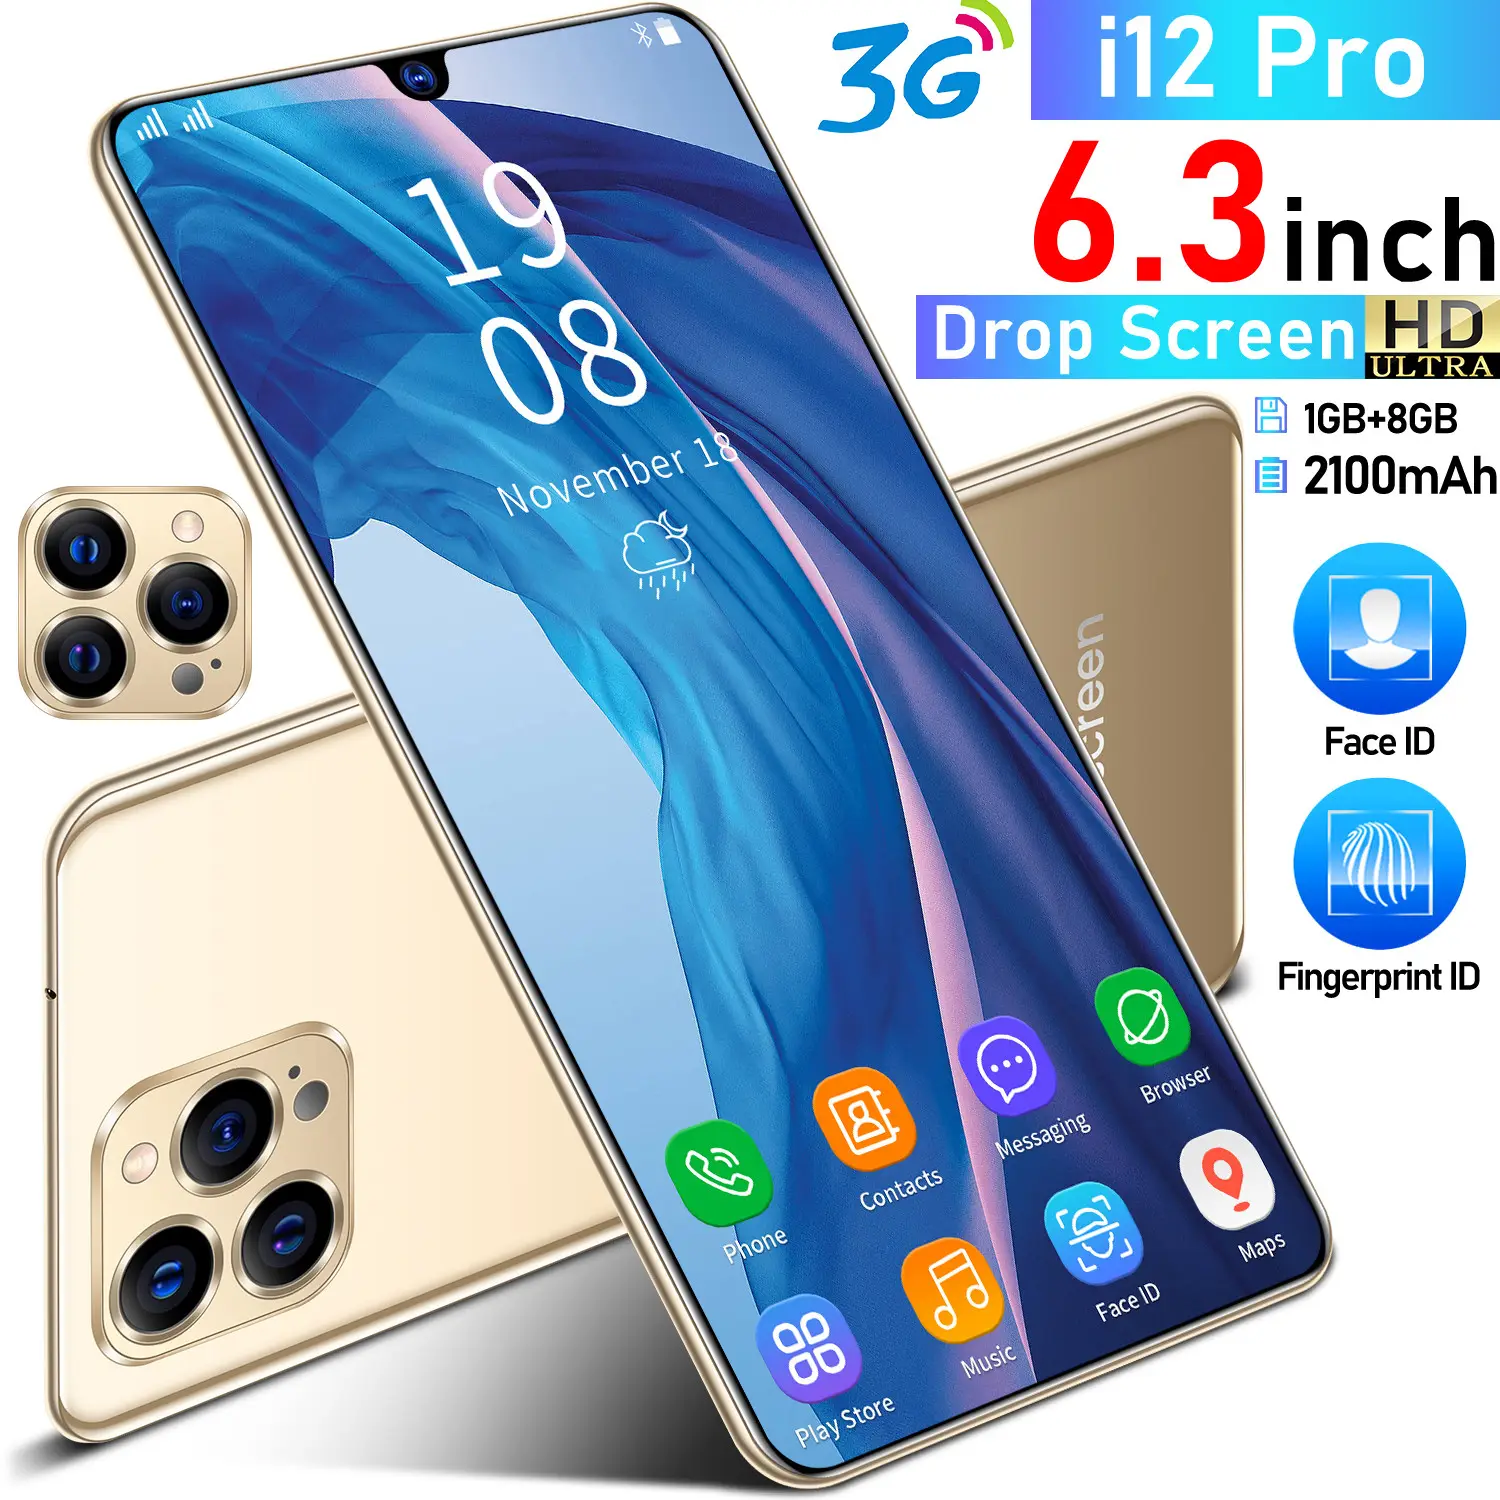 2021 Hot sales Cheap Price IP12 Pro 6.3 Inch 1G + 8G dual sim Smartphone Dual Core android watch phone